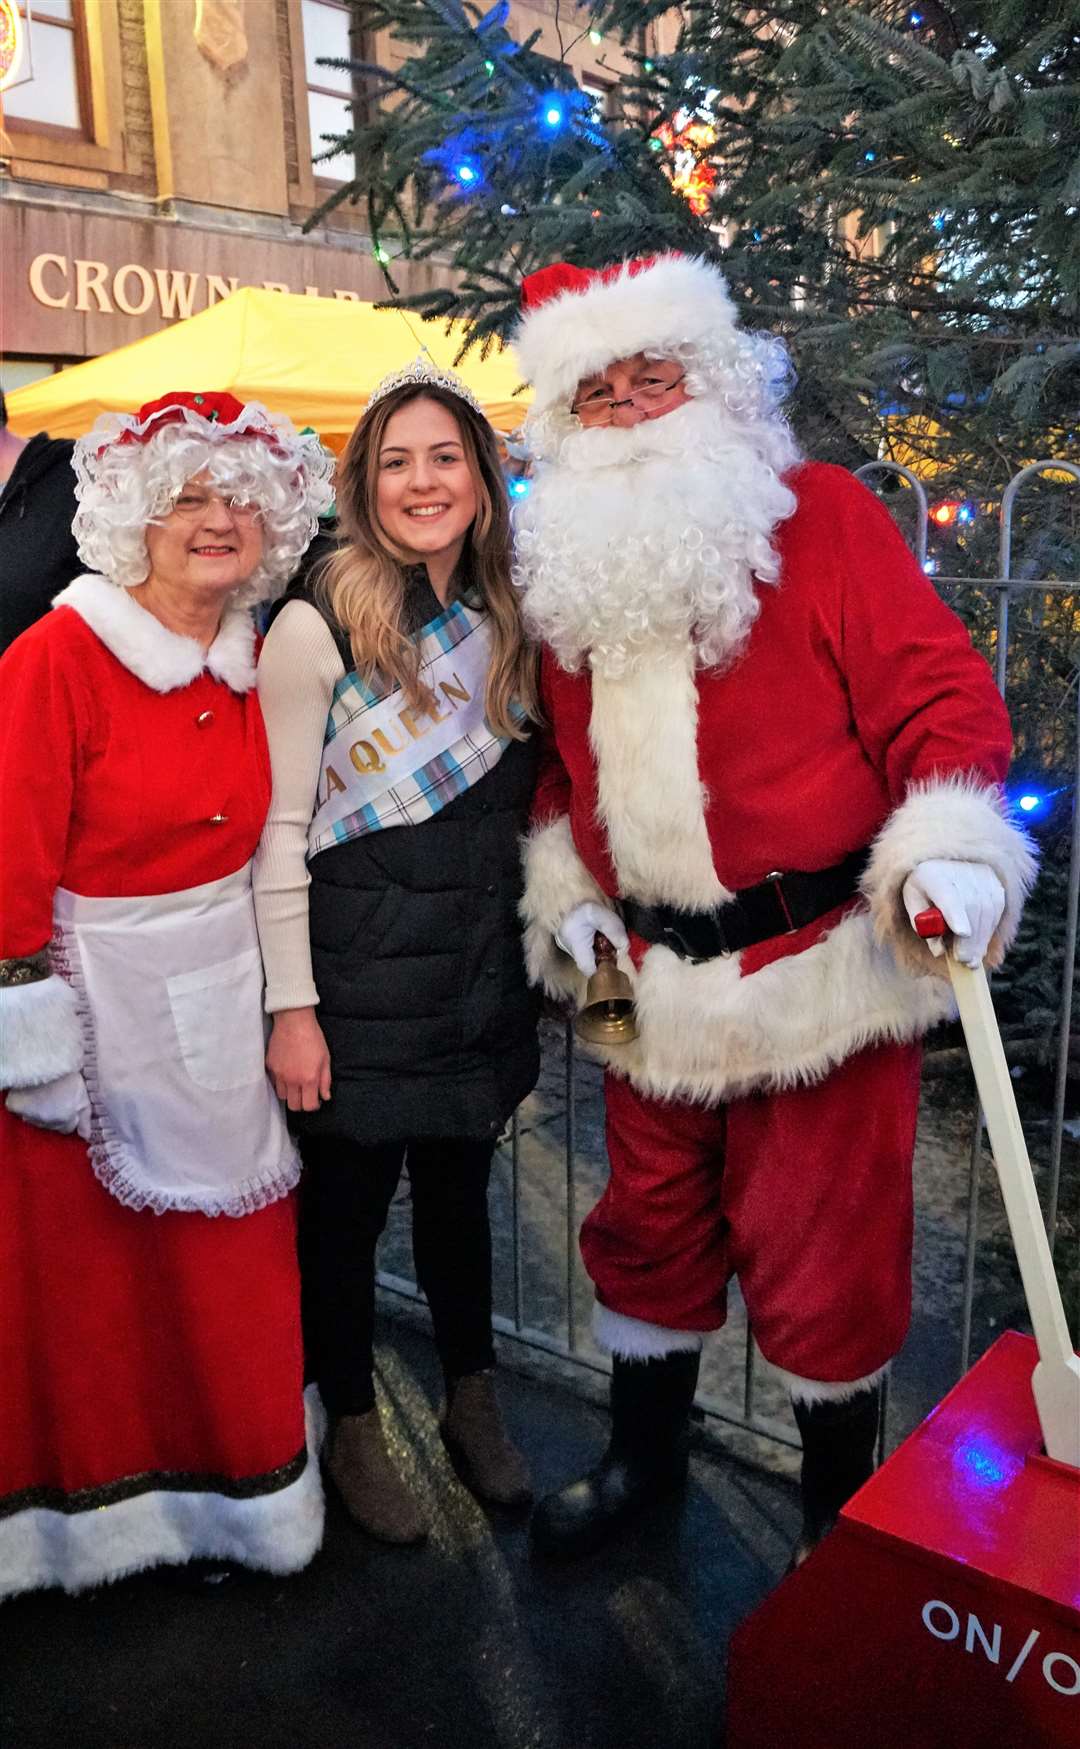 Gala Queen Beth Dunnett switched on the lights along with Santa and Mrs Claus at 4pm as the crowd counted down from 10. Picture: DGS